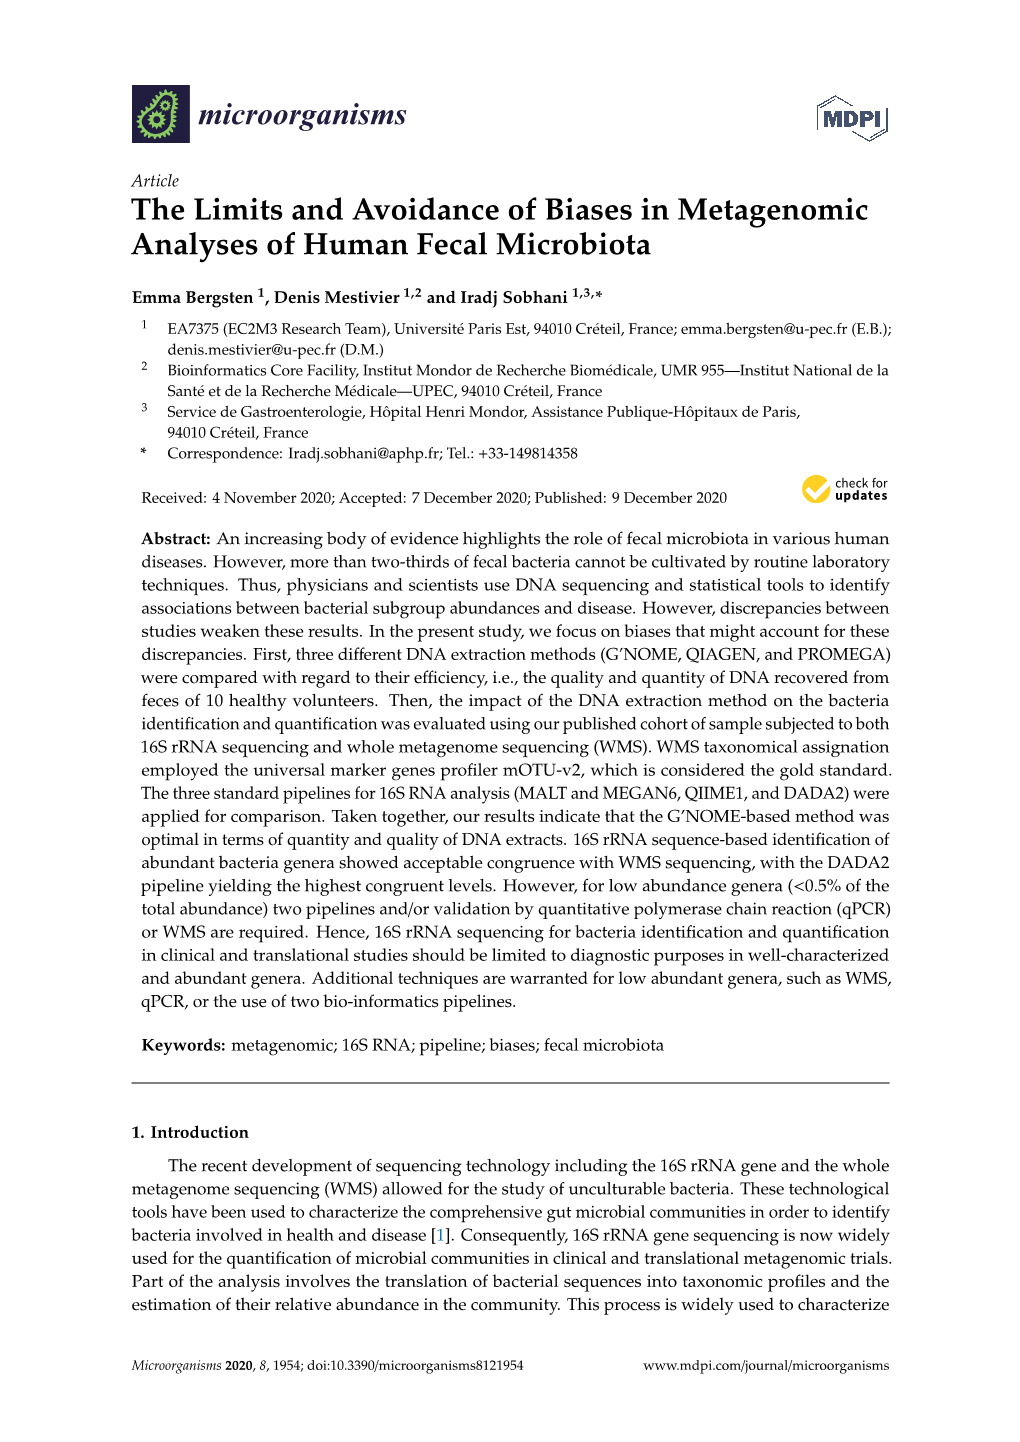 The Limits and Avoidance of Biases in Metagenomic Analyses of Human Fecal Microbiota